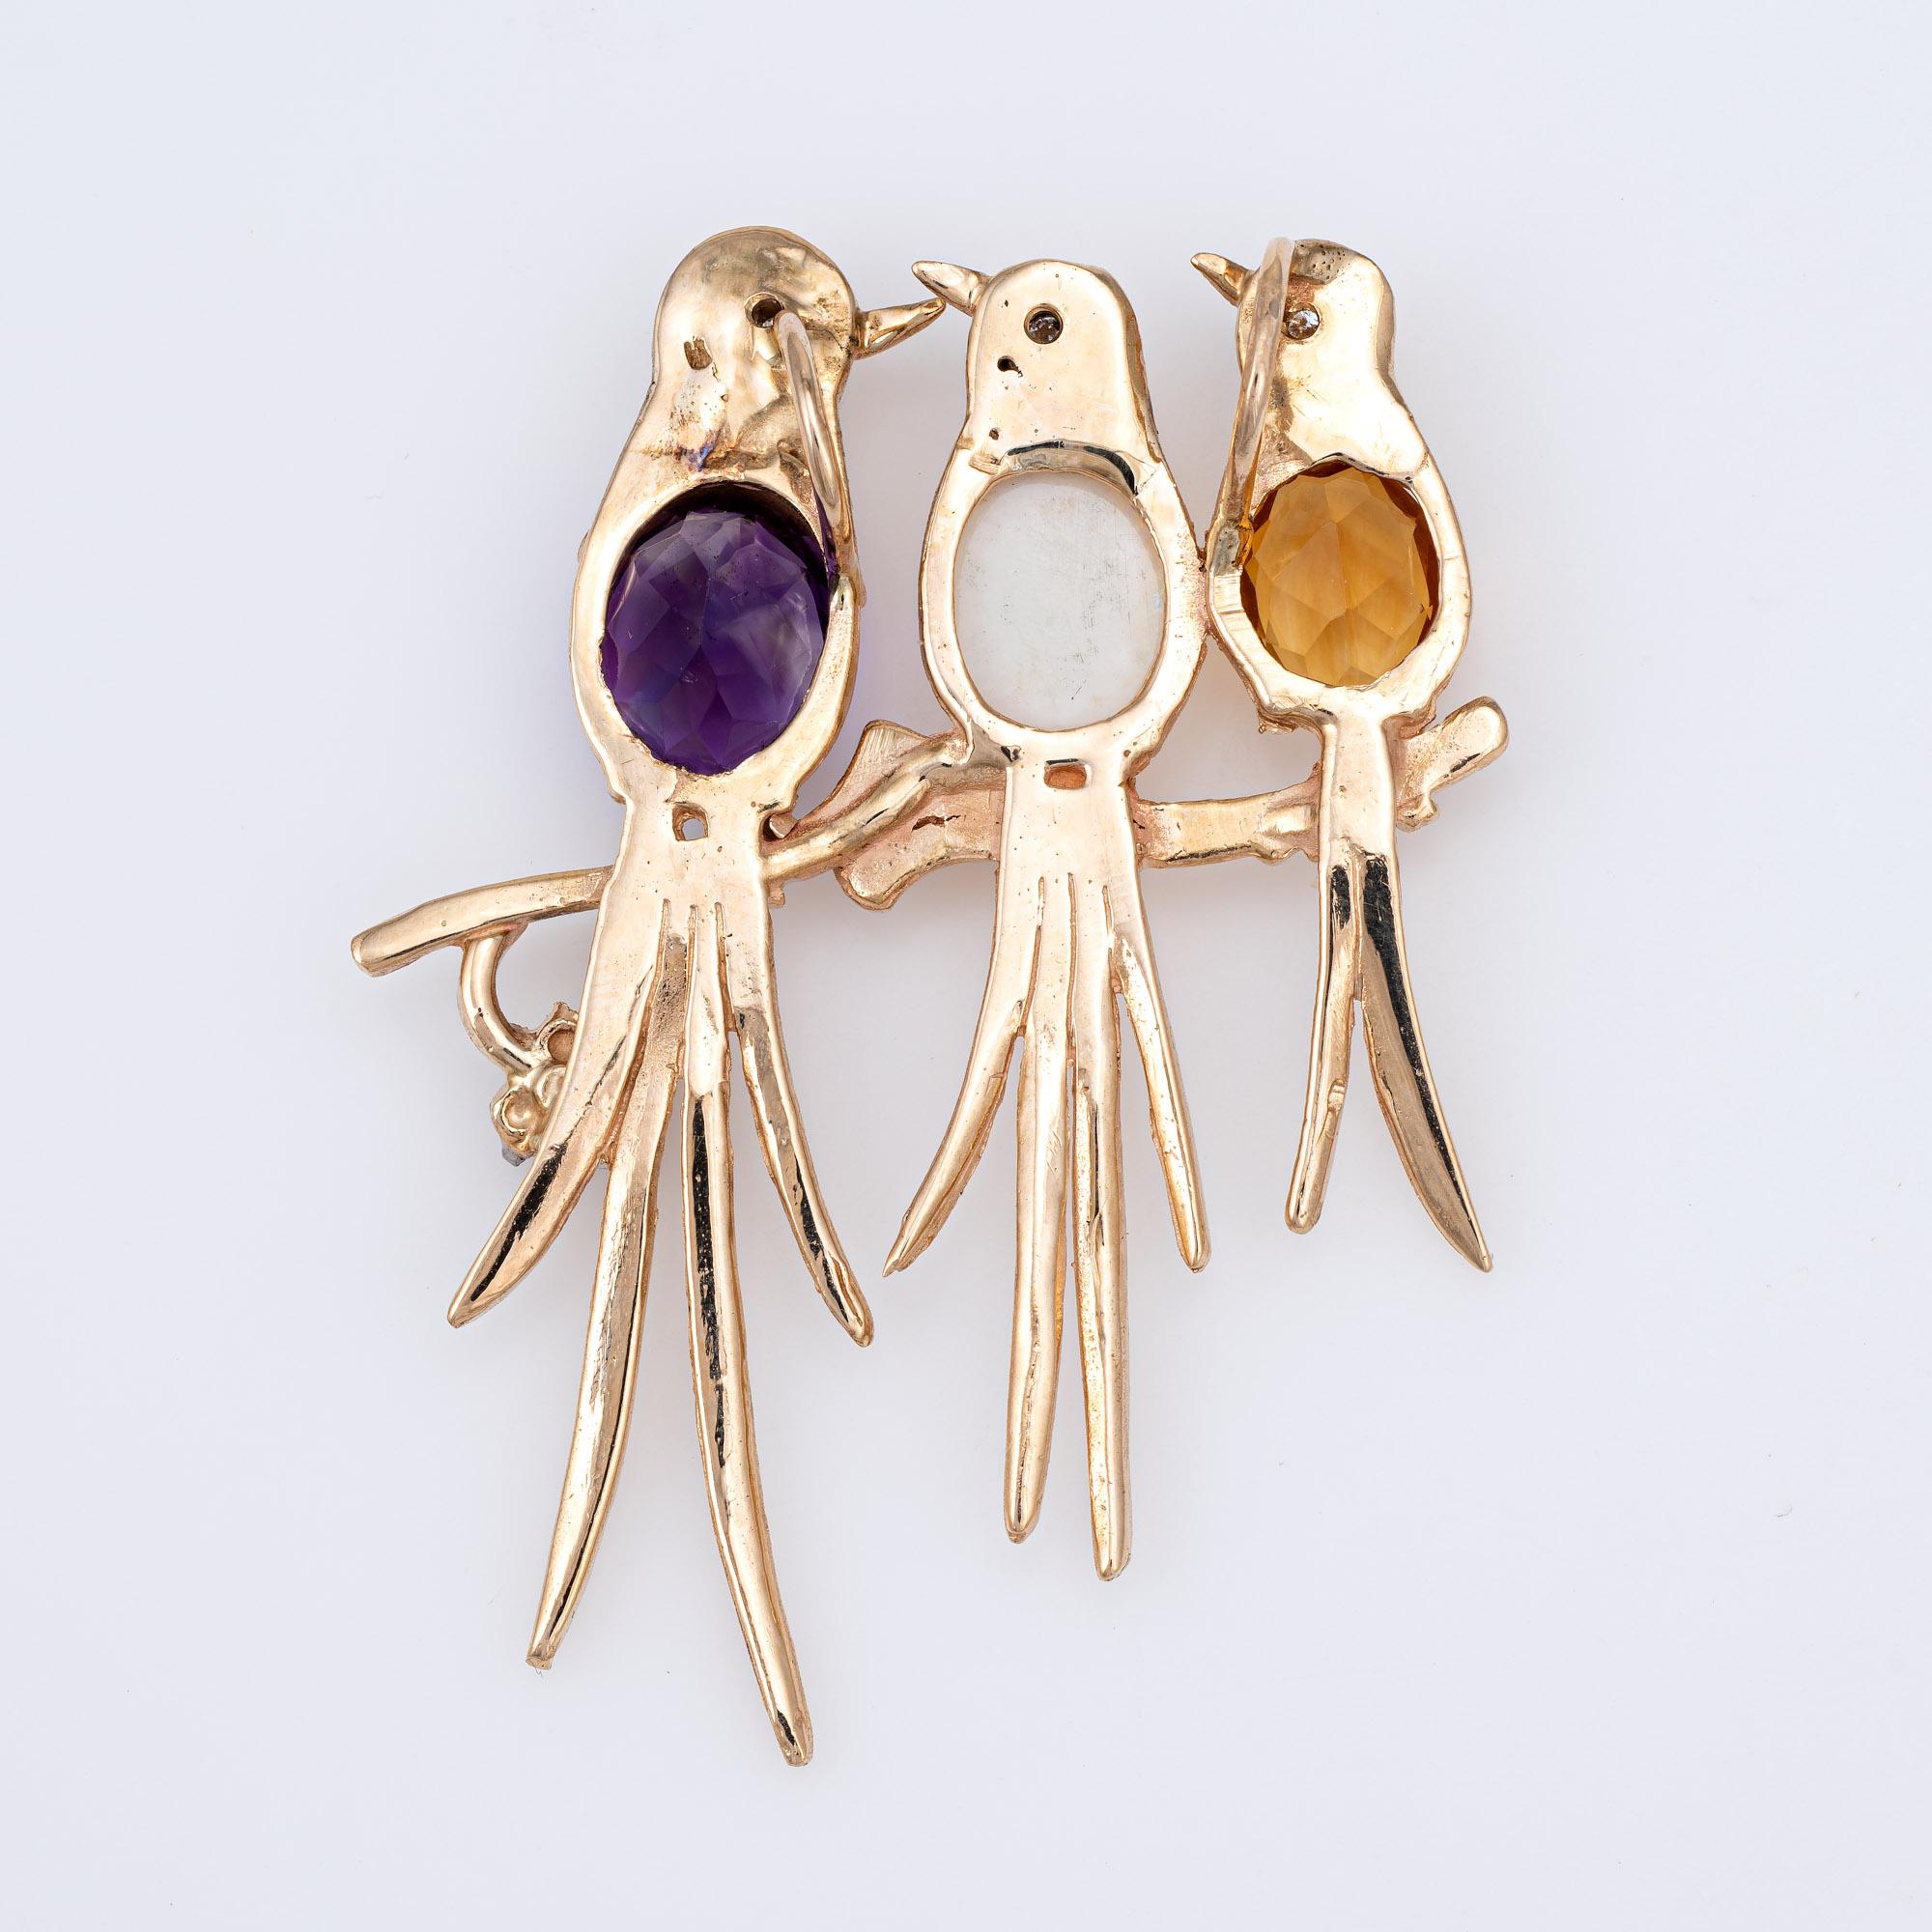 Finely detailed vintage pendant featuring three birds on a branch (circa 1960s to 1970s) crafted in 14 karat yellow gold. 

Amethyst, citrine and opal range in size from 2 carats to 2.50 carats. Diamonds total an estimated 0.10 carats (estimated at